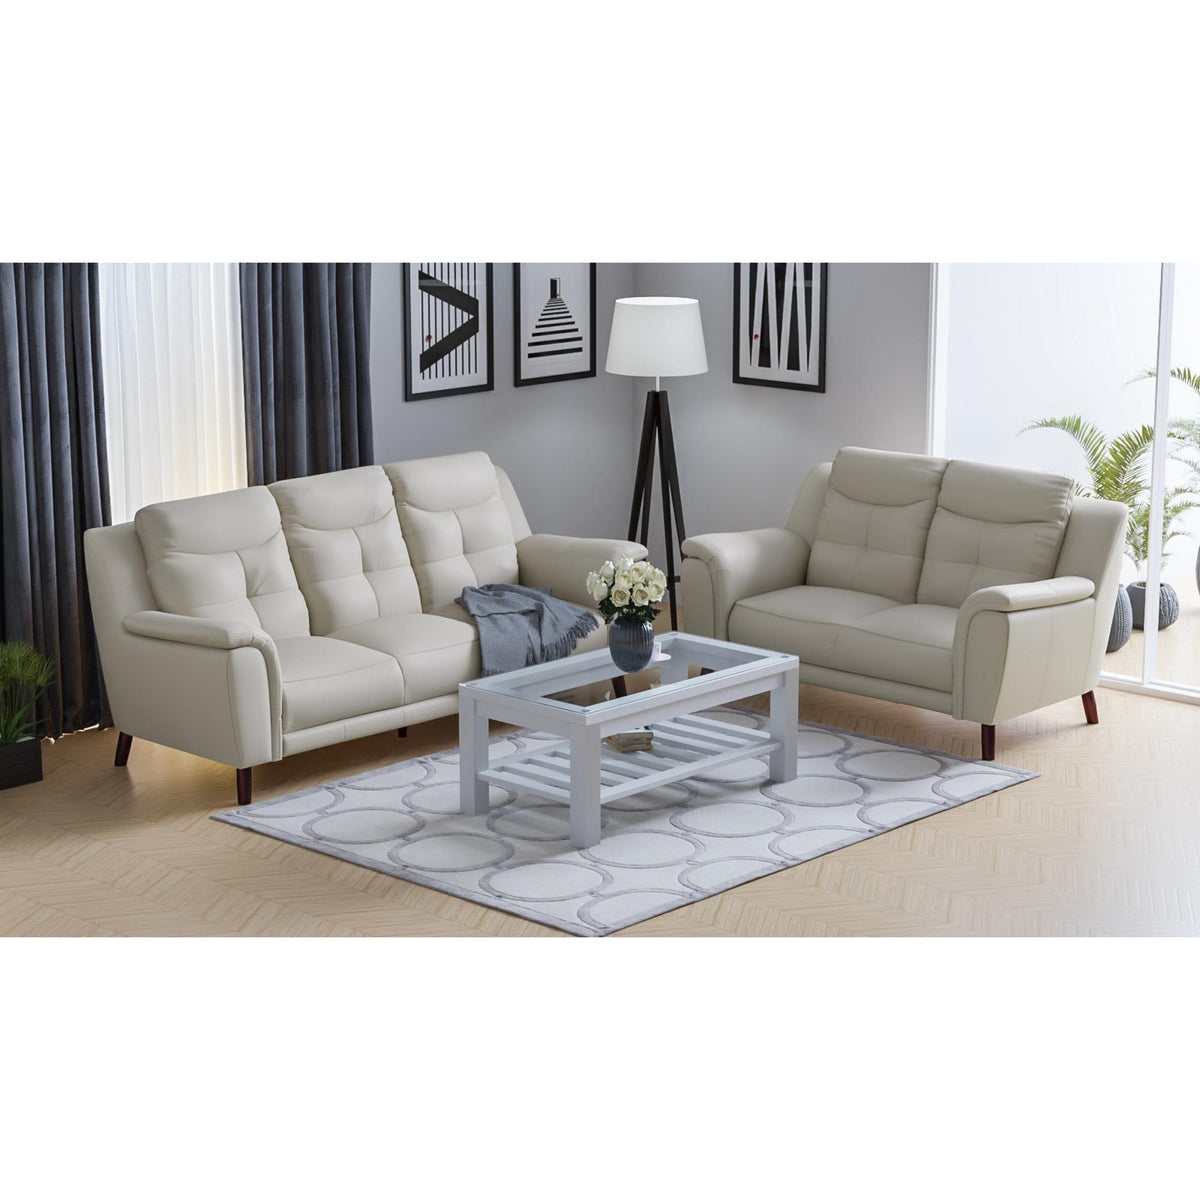 Opal 2 Seater Leather Sofa Silver 